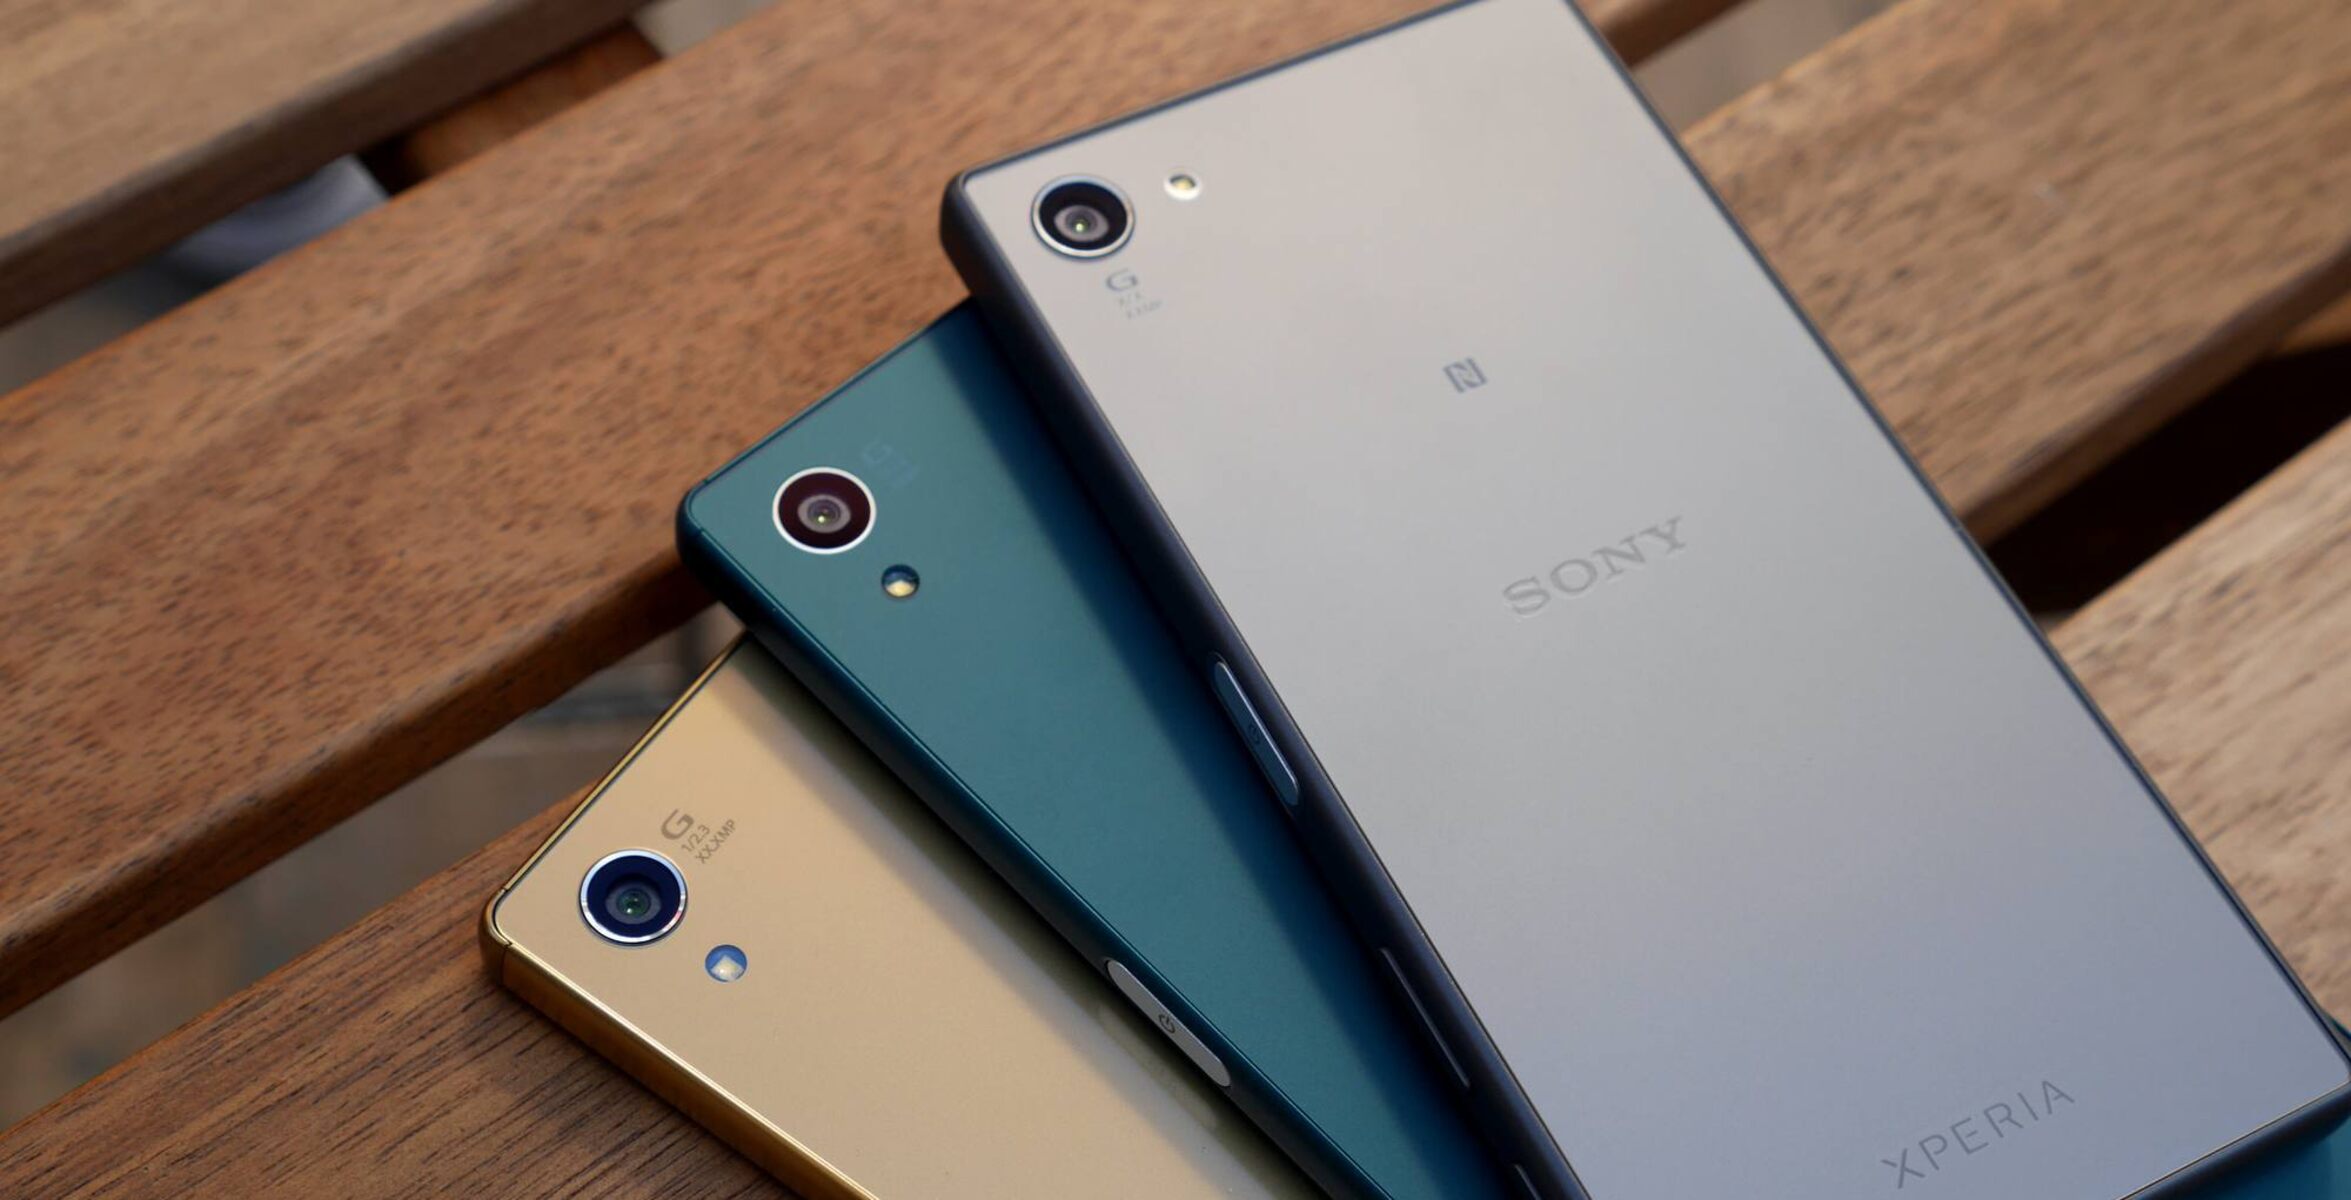 guide-to-receiving-pictures-on-sony-xperia-devices